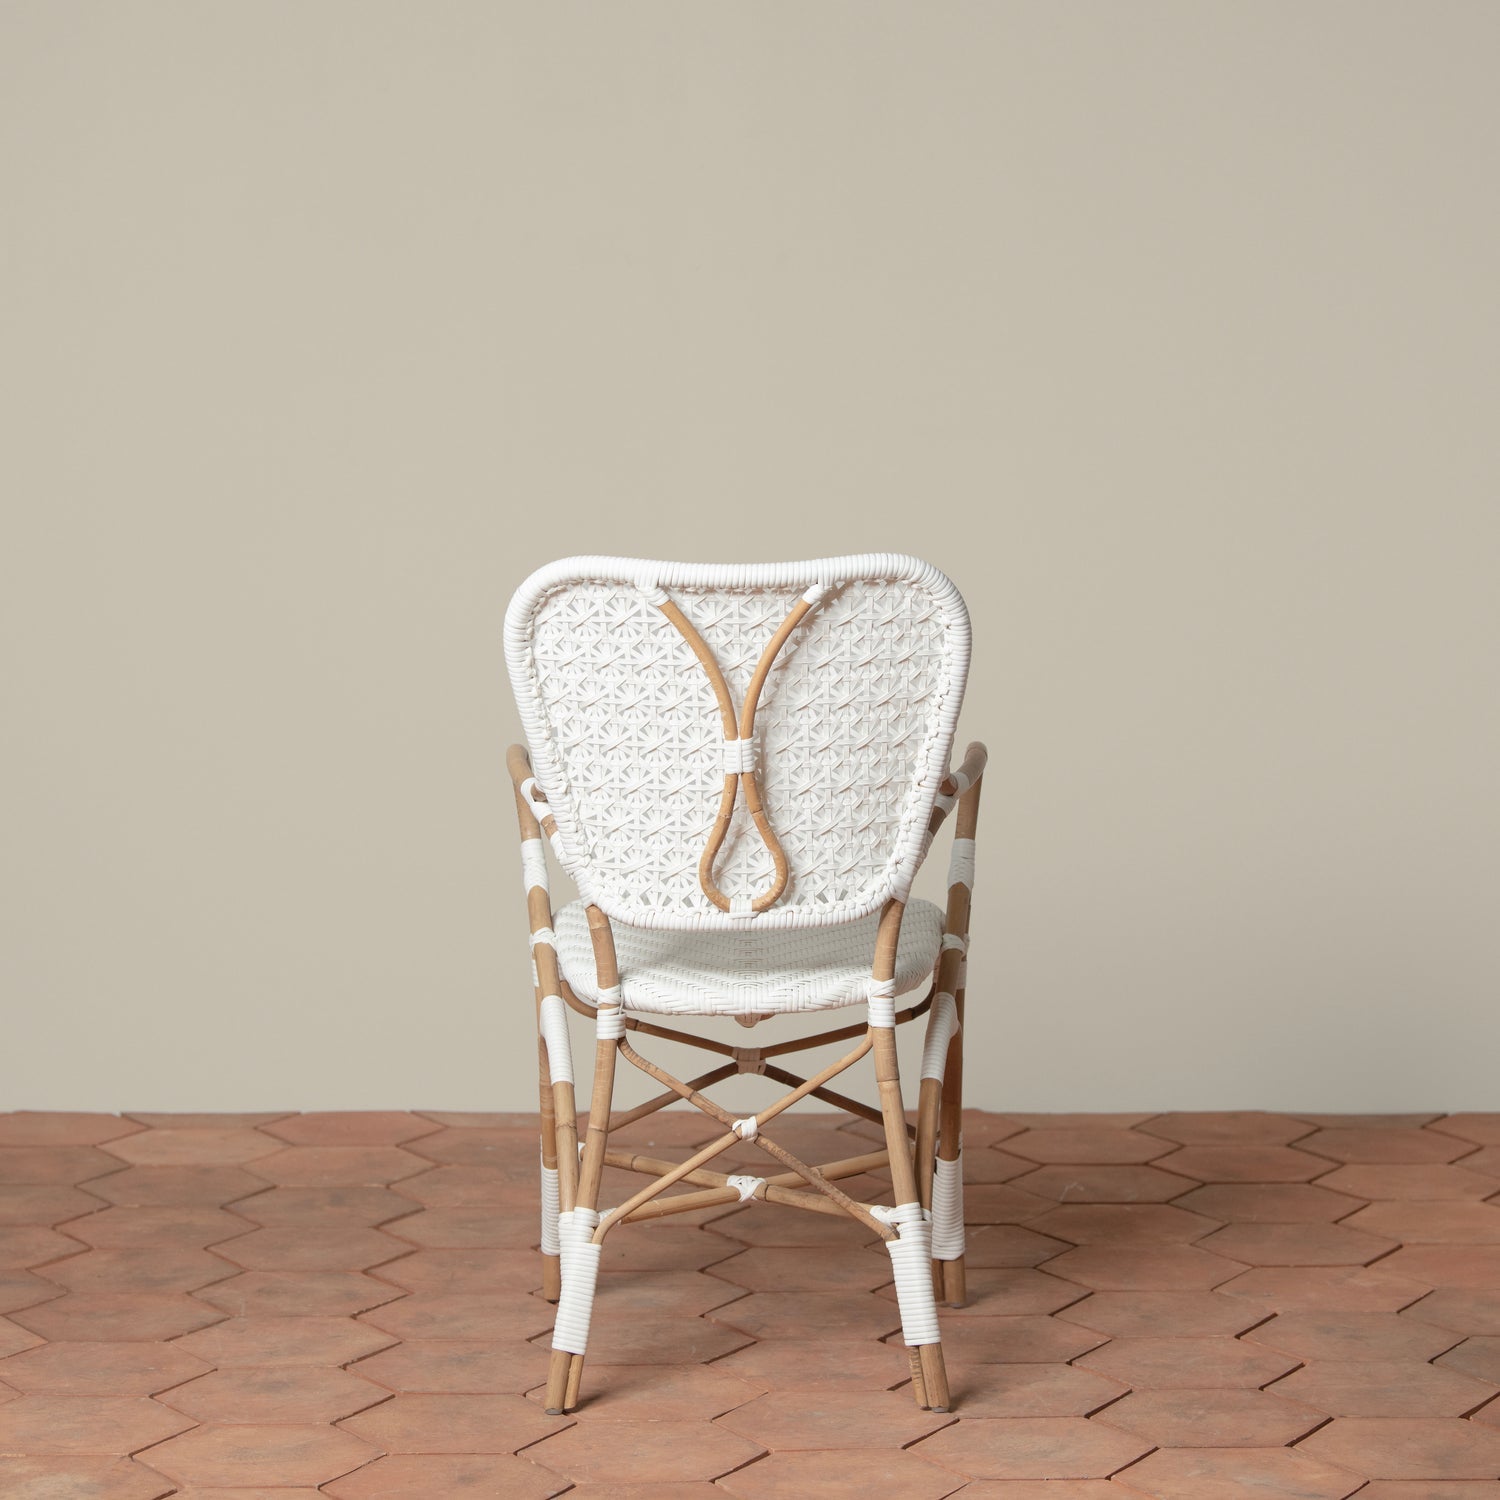 On a neutral background is a white and tan woven rattan chair with woven cane on the backrest and seat.